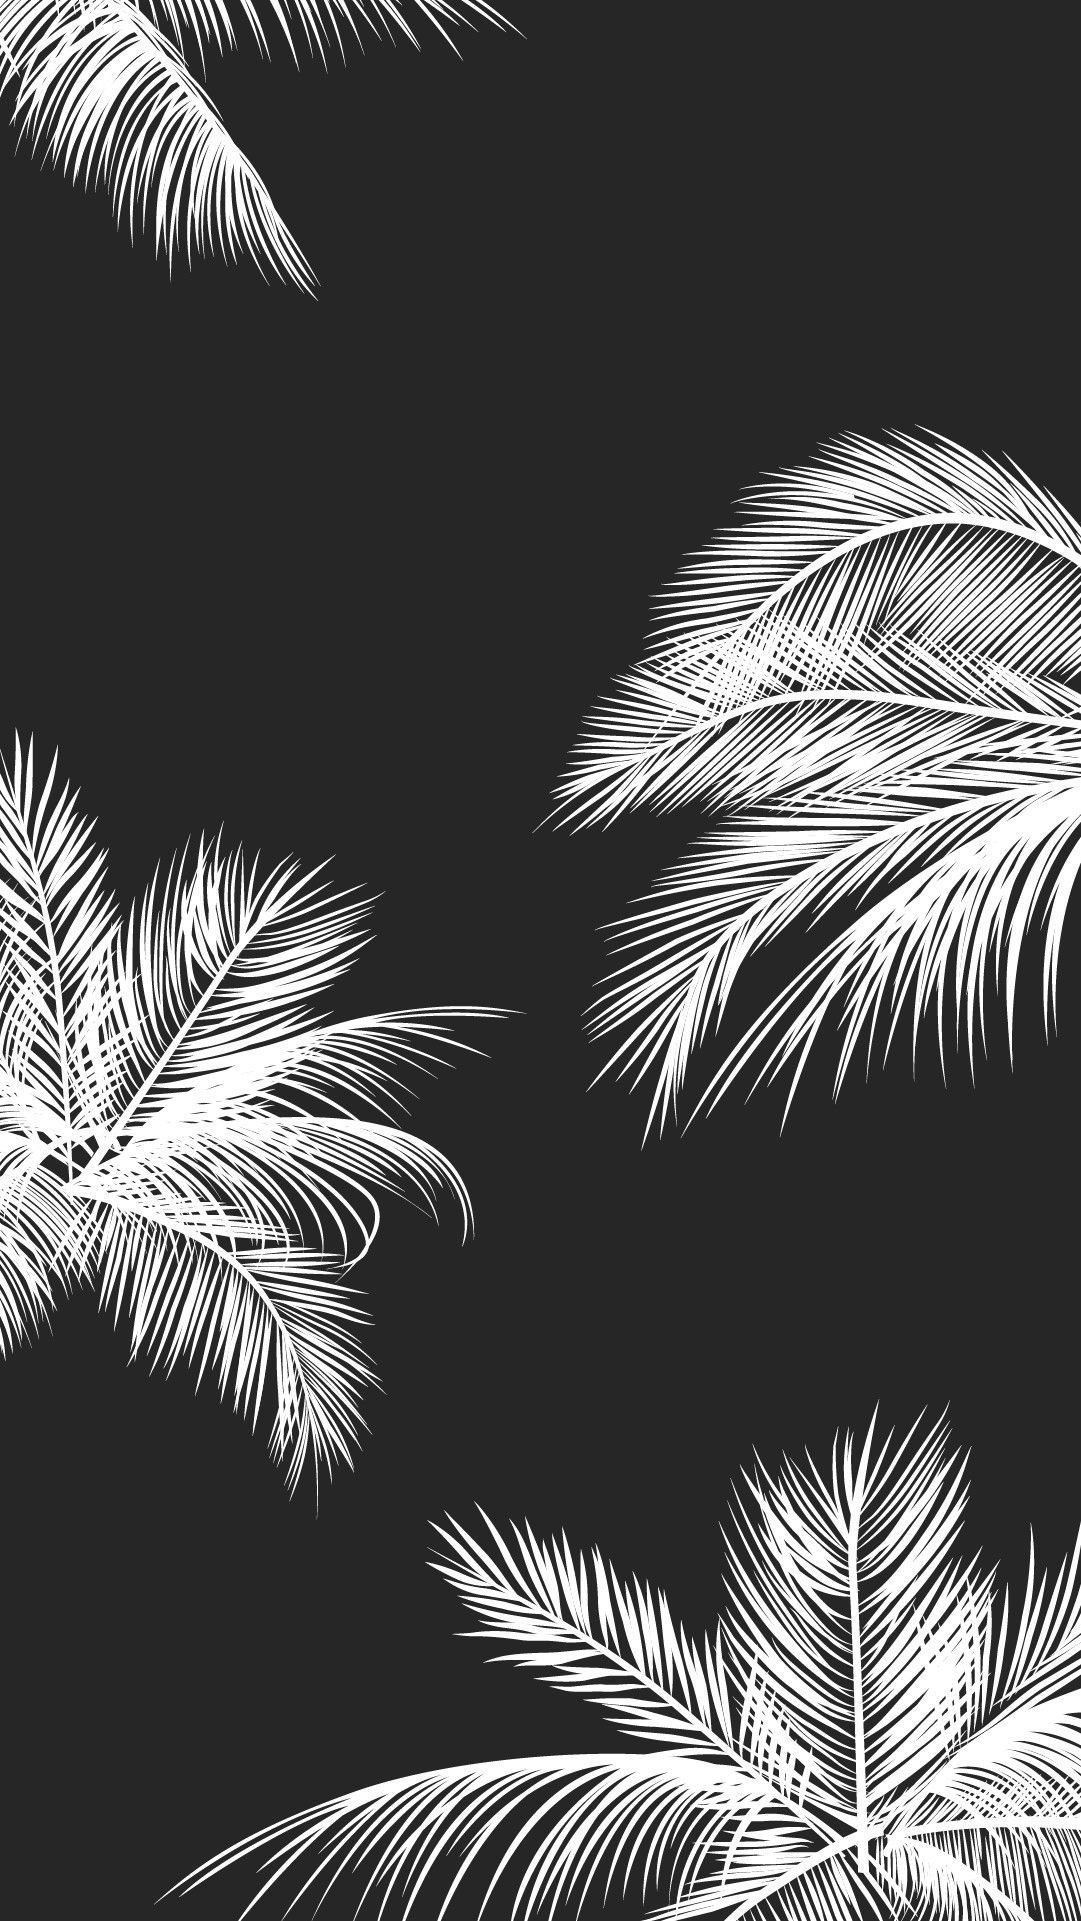 Black And White Aesthetic Design Wallpapers - Wallpaper Cave